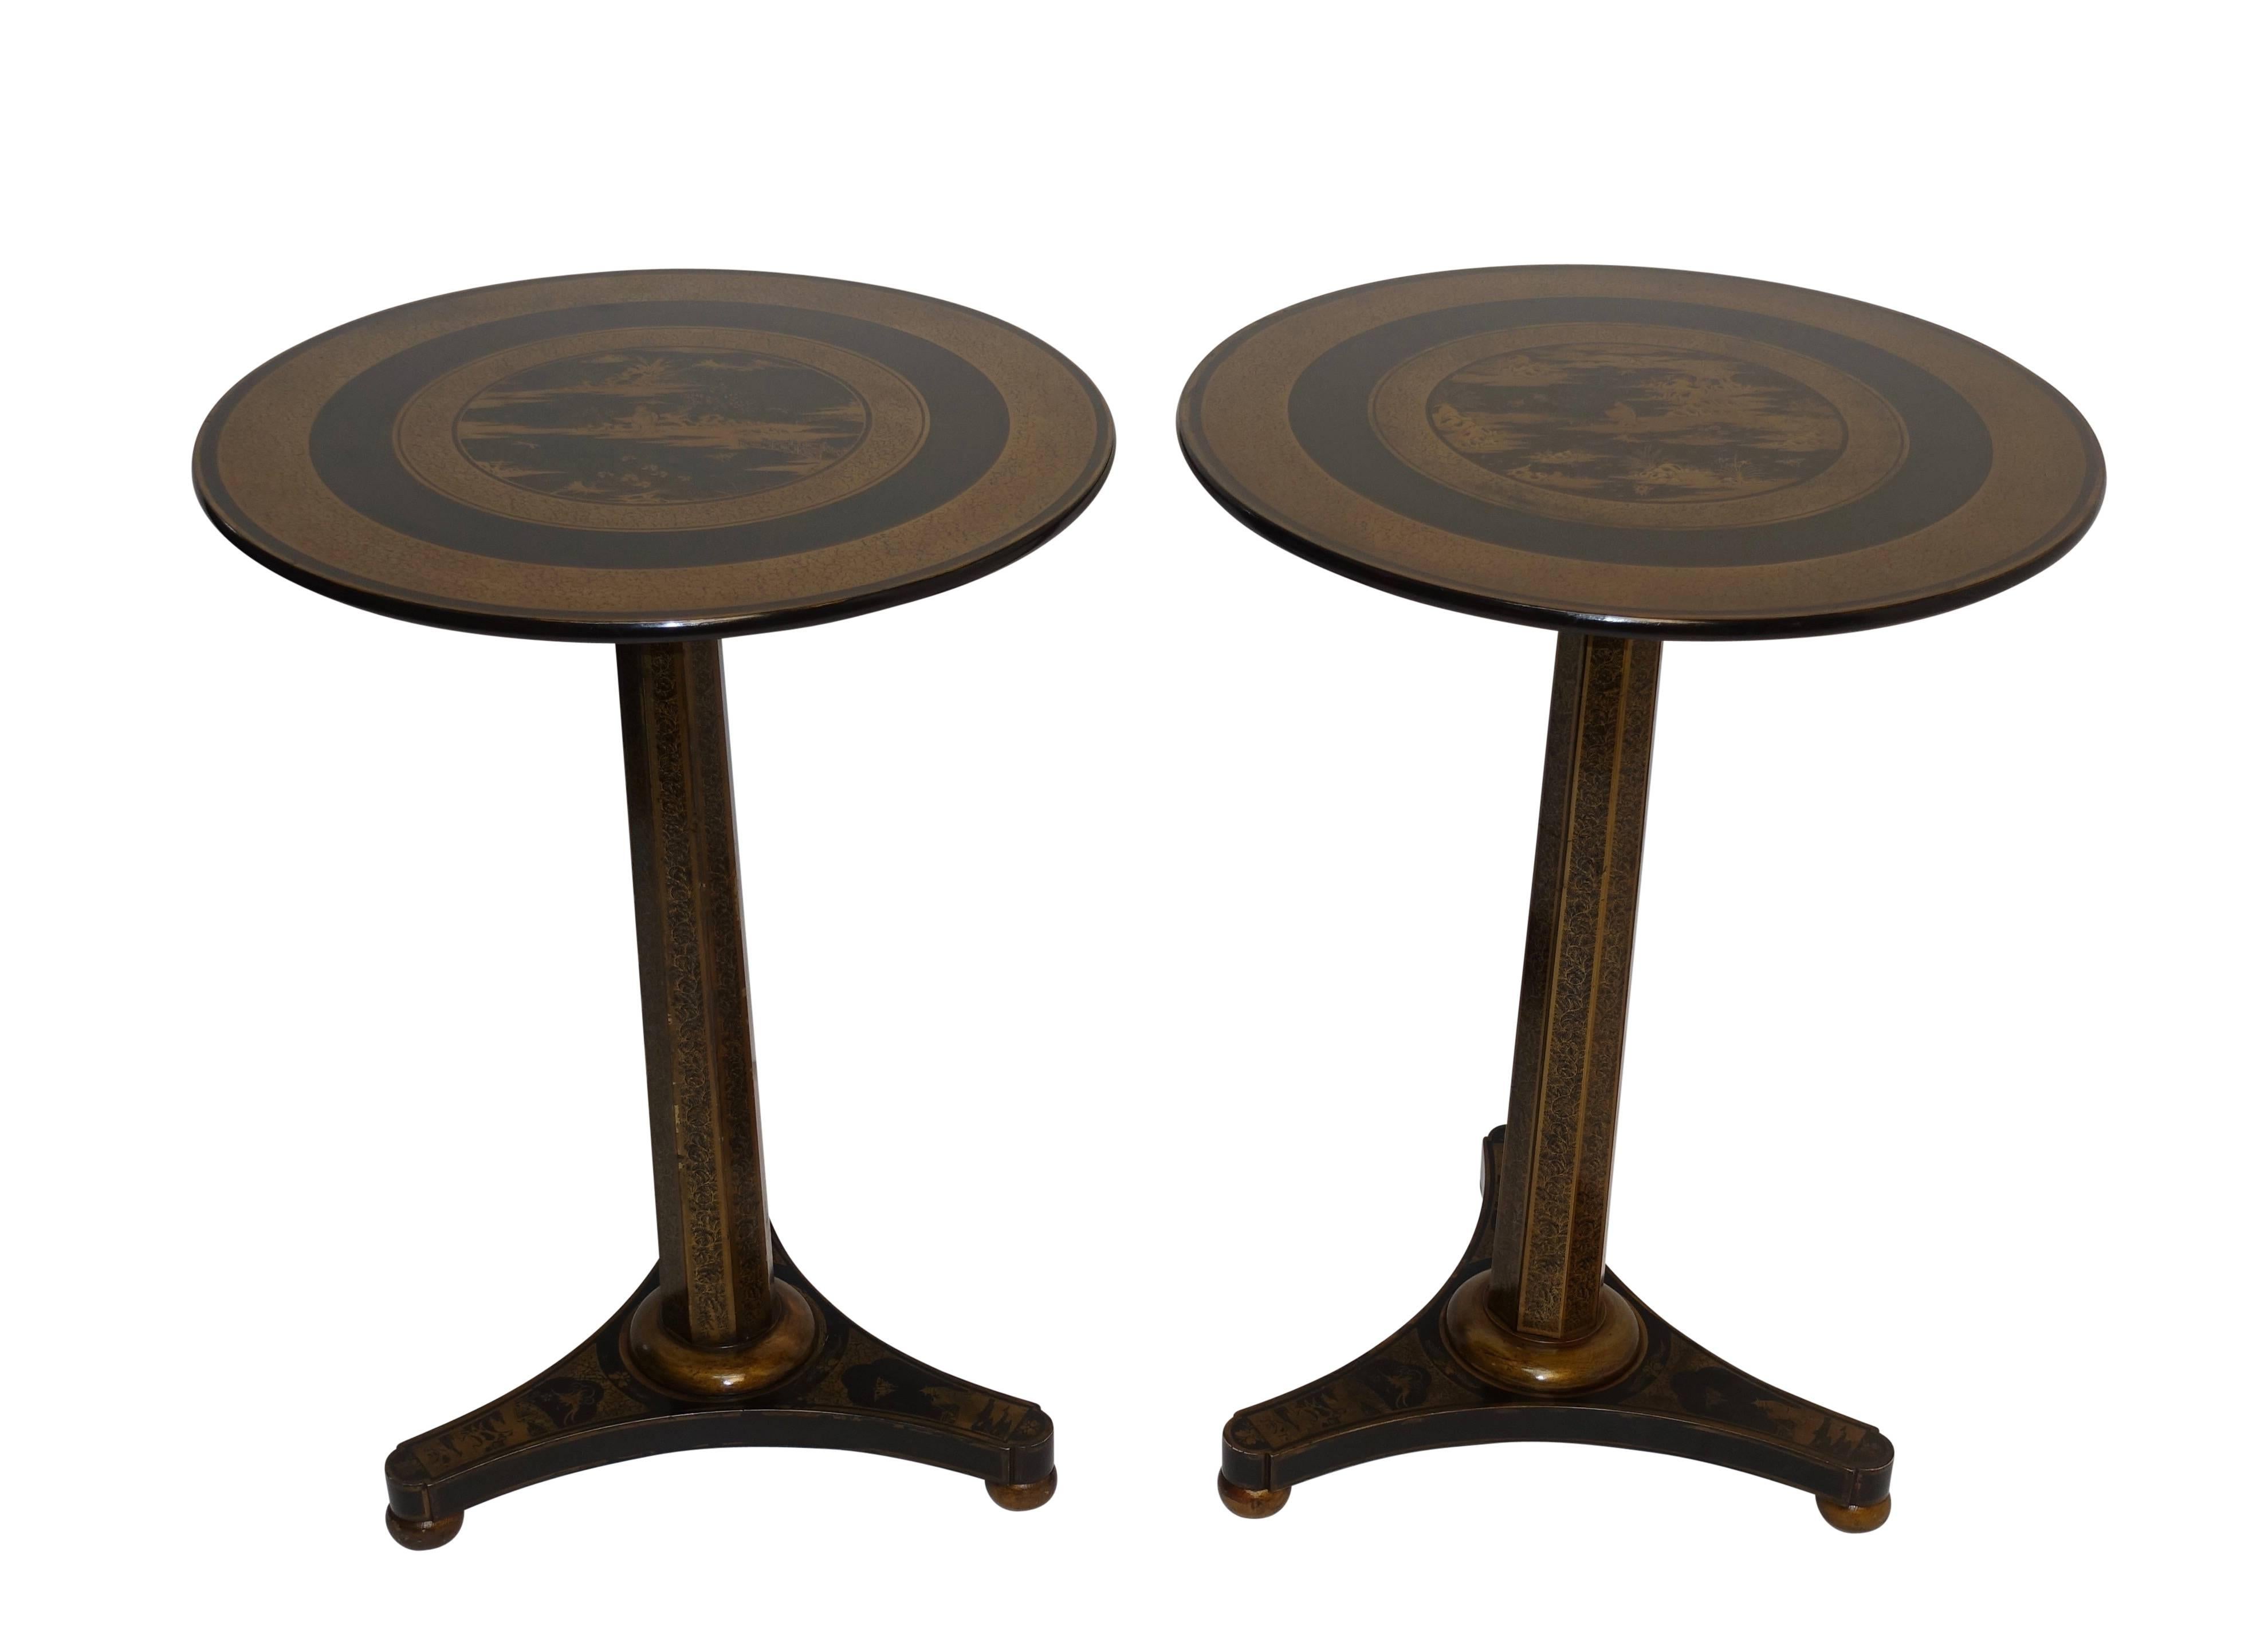 A pair of Regency style black lacquered side tables with gold painted chinoiserie scenes and having bands of vining leaves running along the tapering octagonal column, England, mid-19th century.